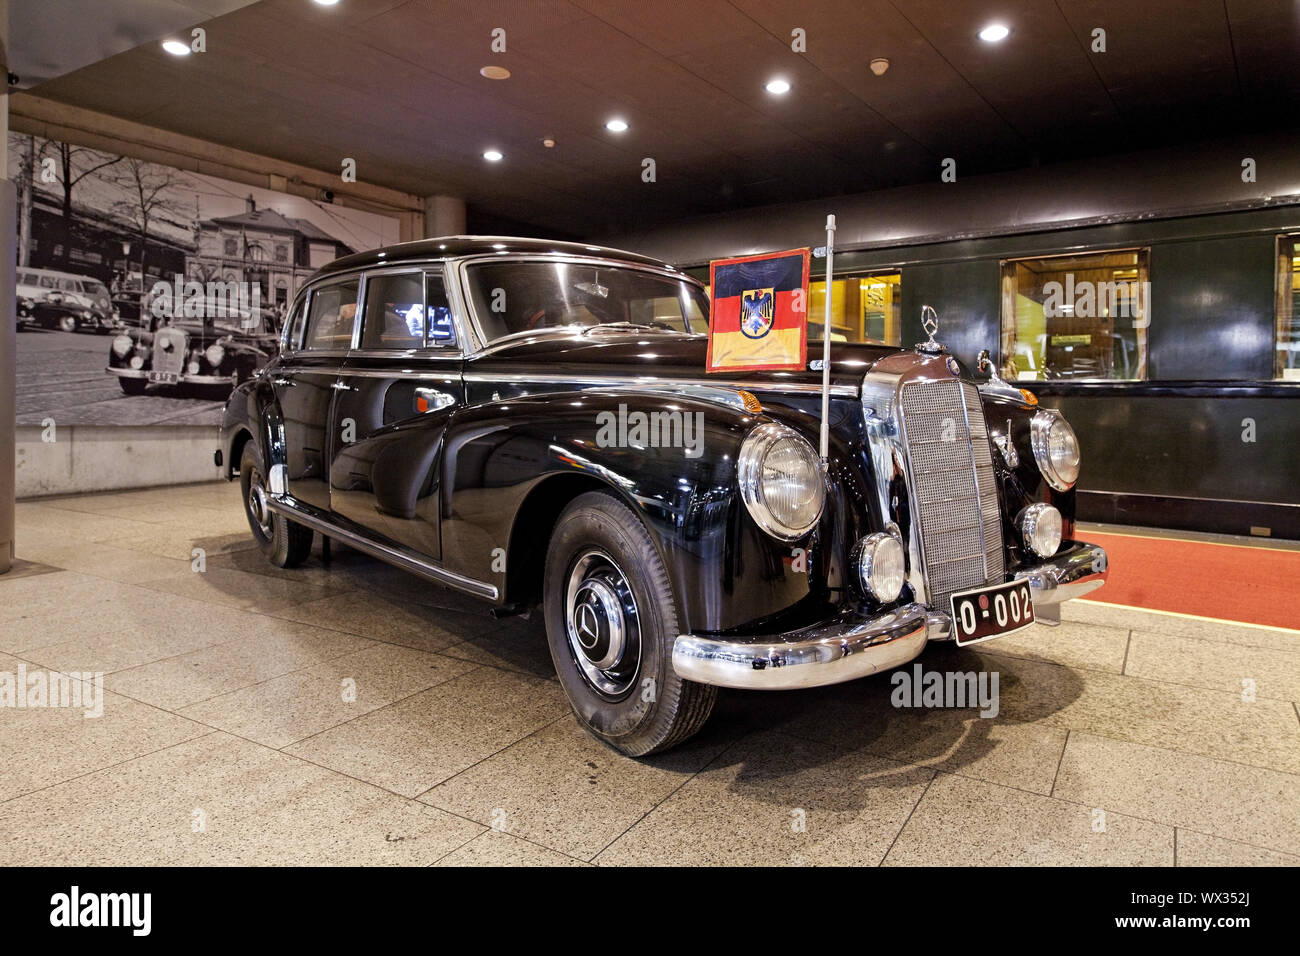 Adenauer's Mercedes 300 with saloon car 10205, House of History, Bonn, Germany, Europe Stock Photo